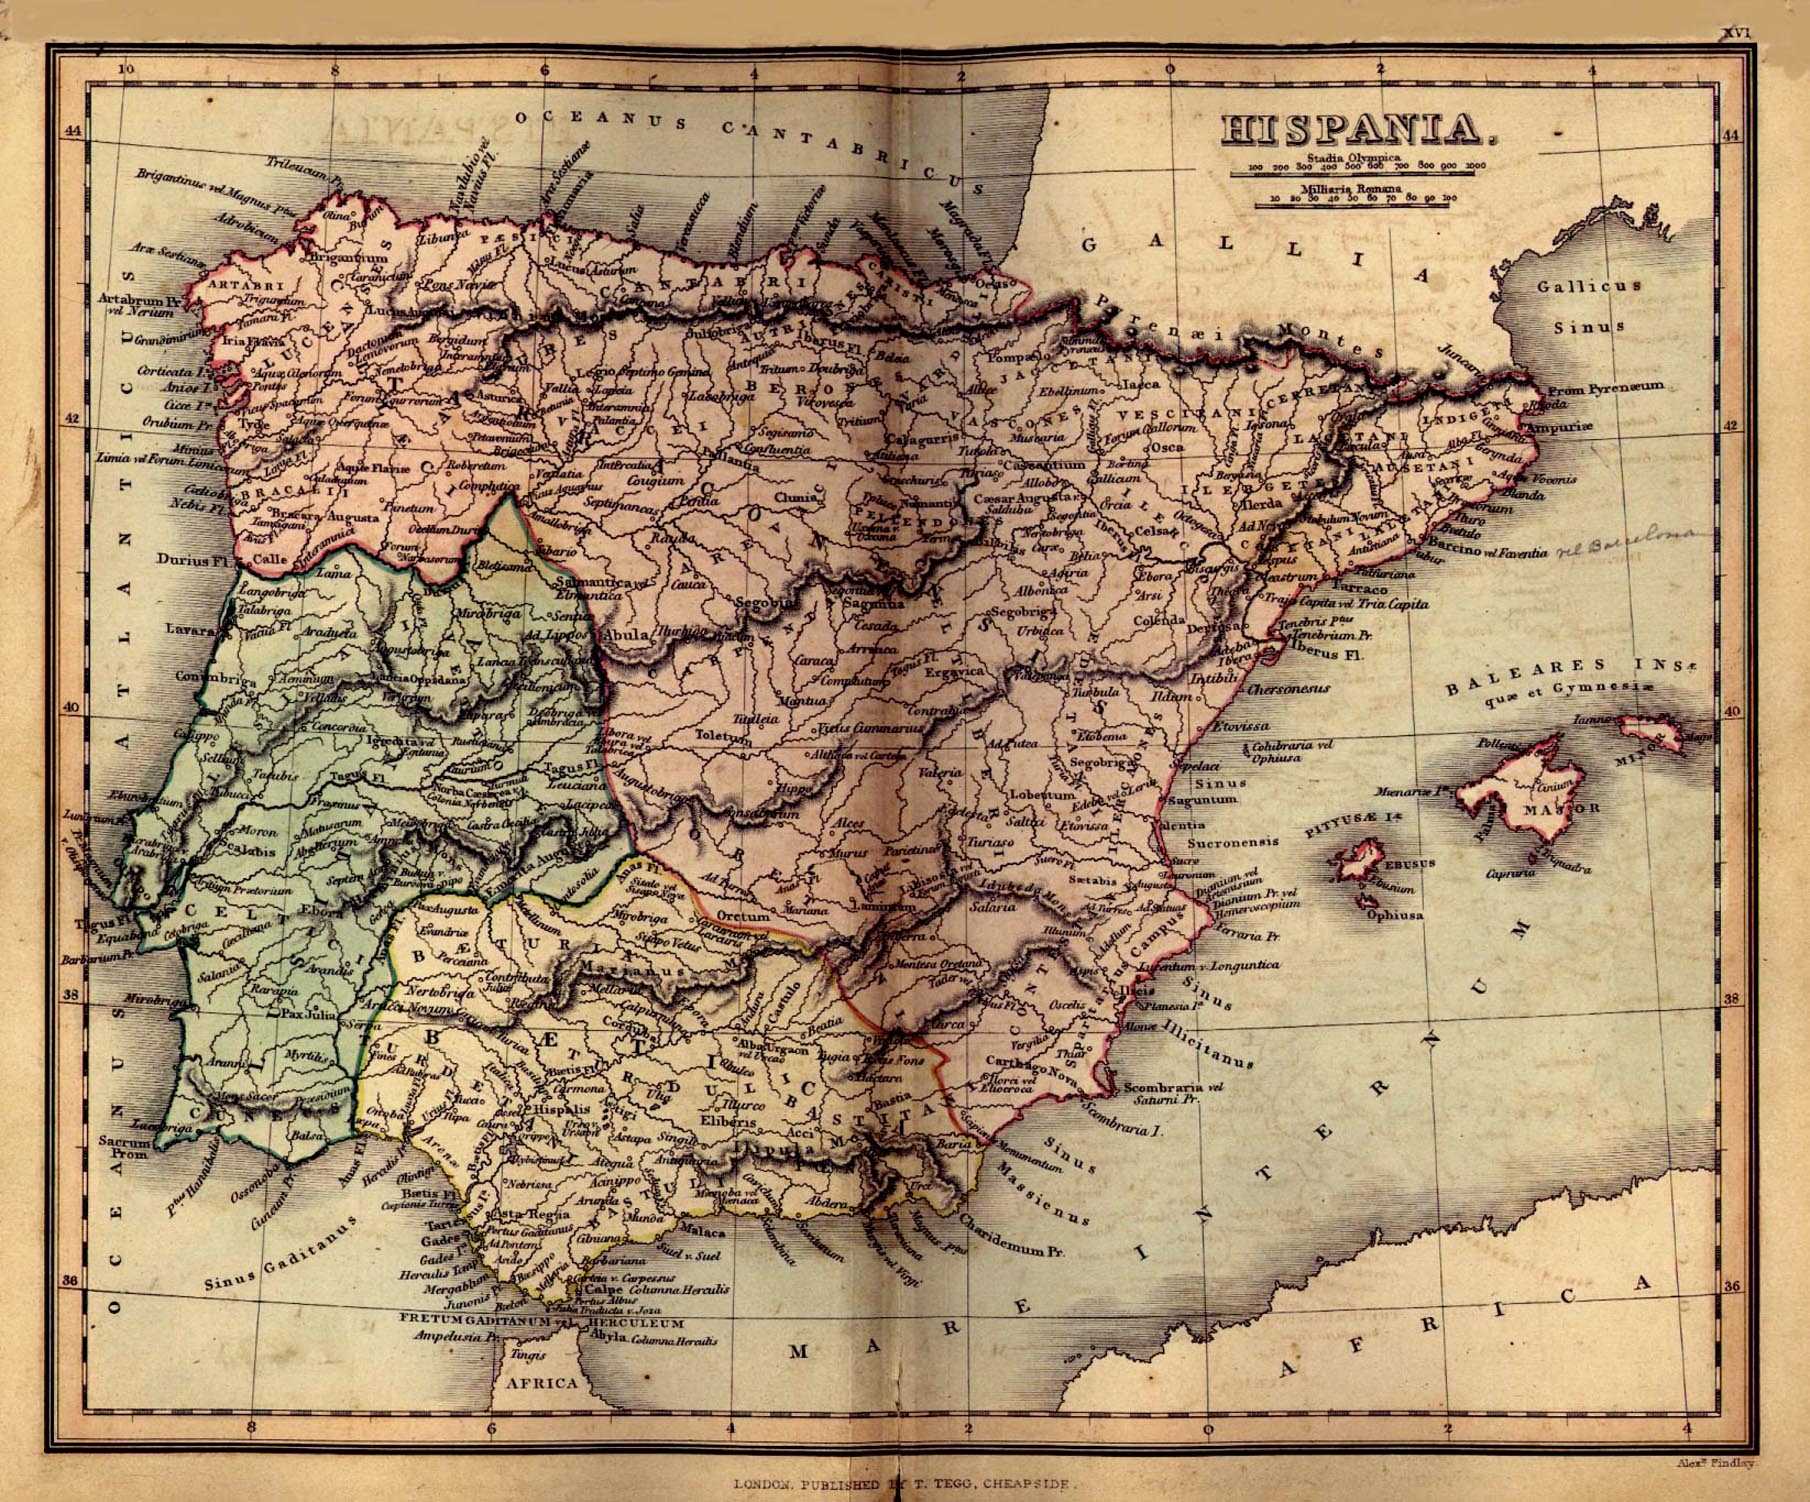 Map Of Spain Hispania [Ancient Spain] (612K)
From A Classical Atlas of Ancient Geography by Alexander G. Findlay. New York , Harper and Brothers 1849. 